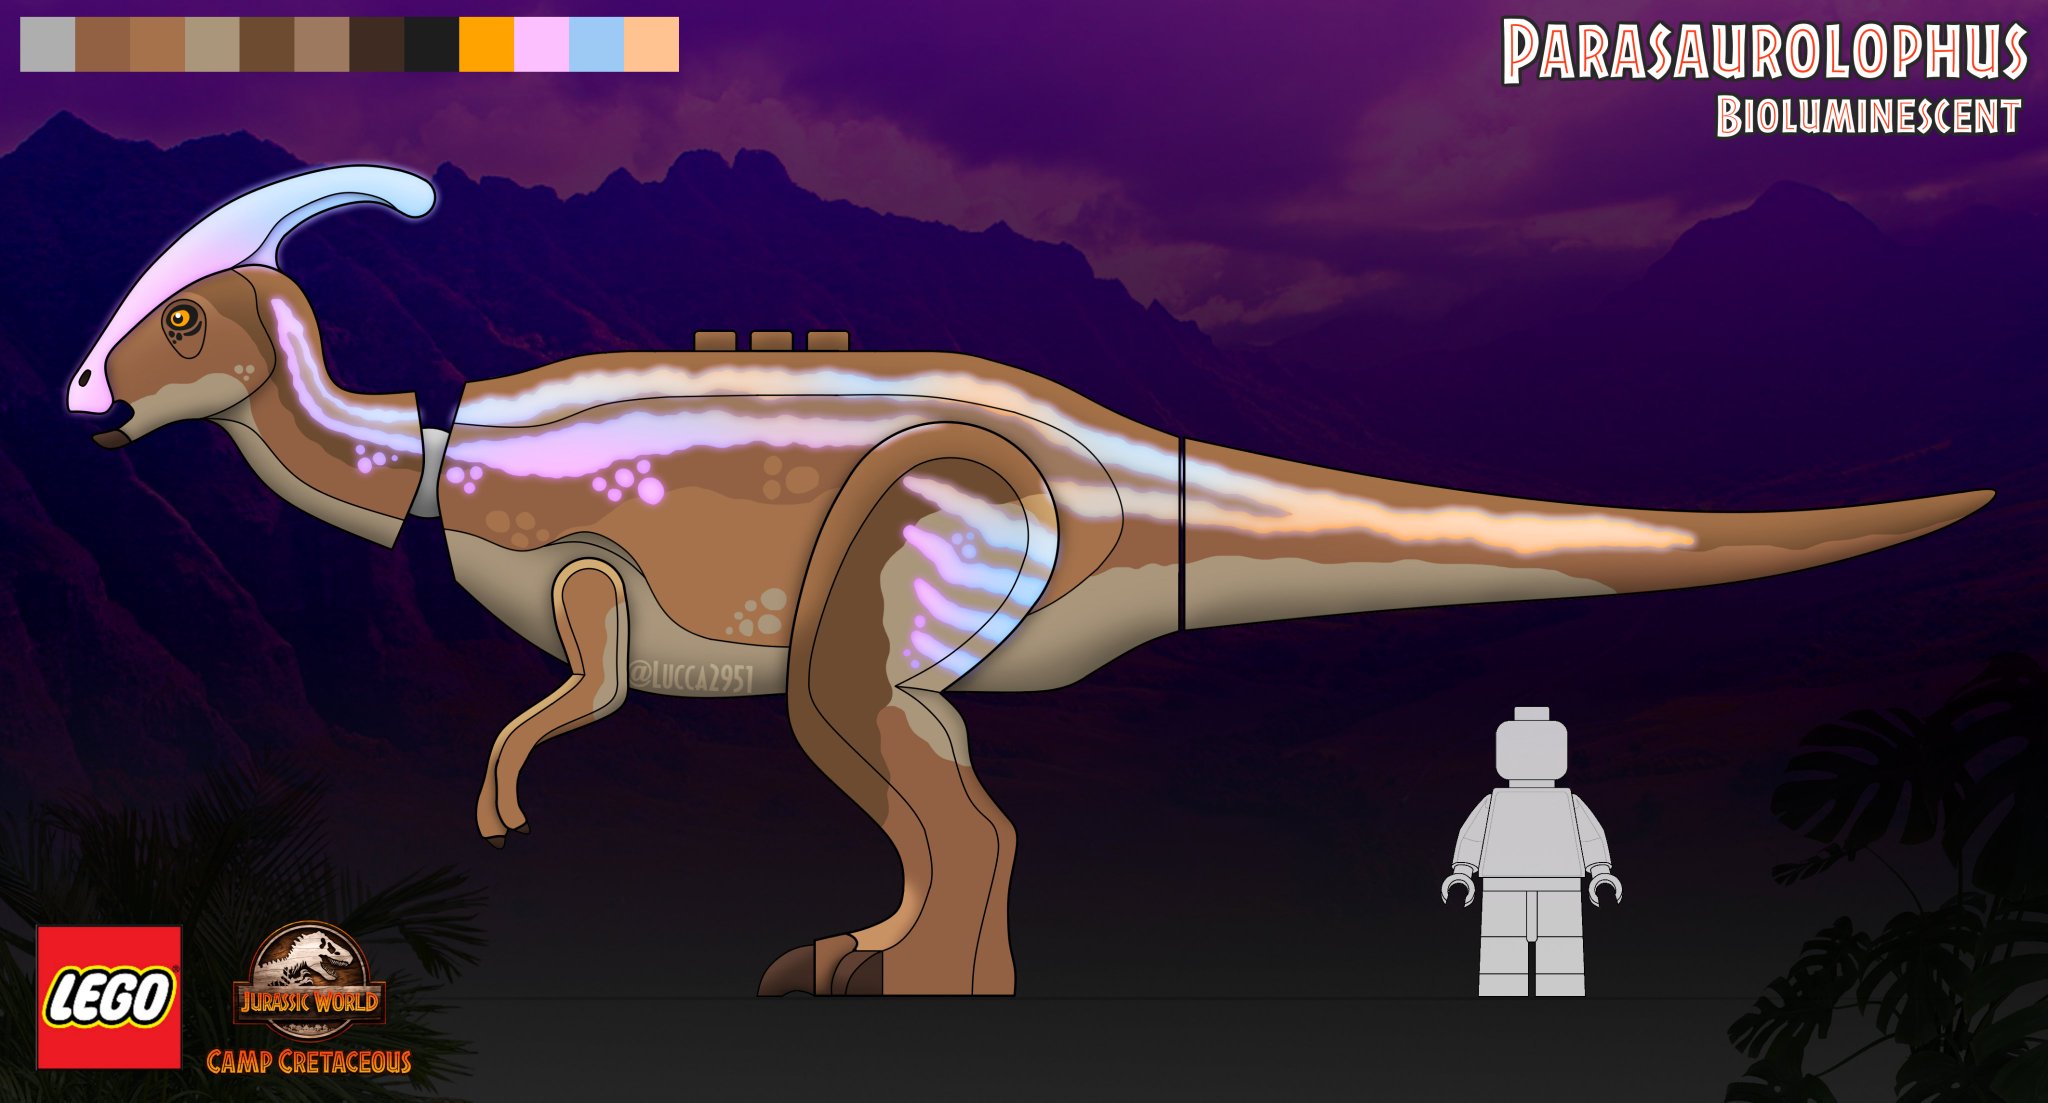 Dr Wu must've put the bioluminescent genes into these Parasauroloph...